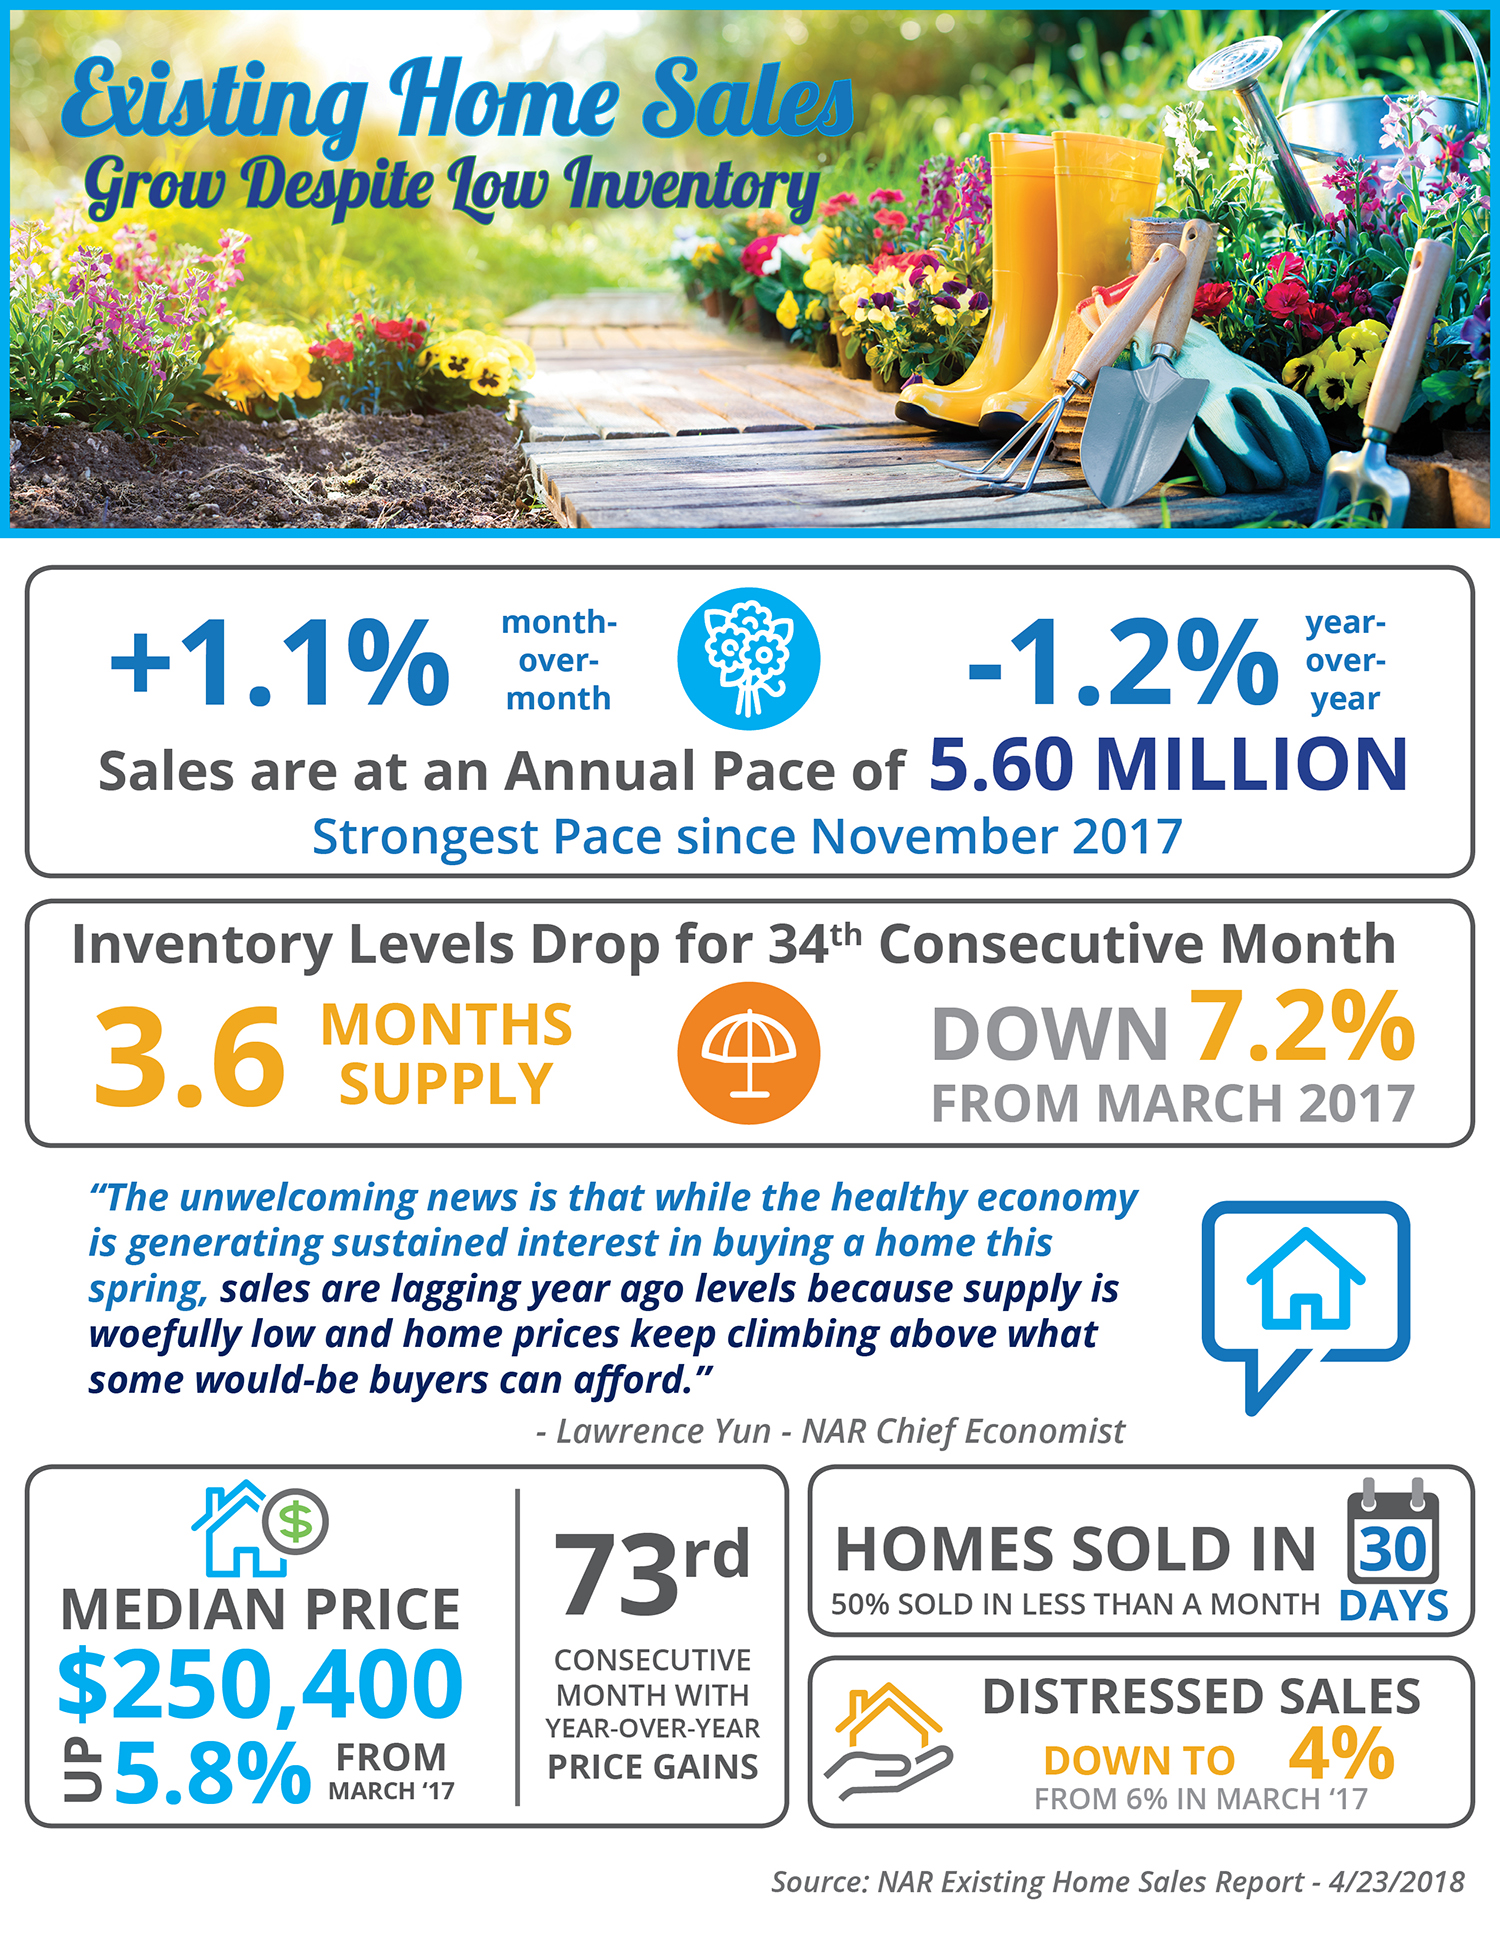 Existing Home Sales Grow Despite Low Inventory [INFOGRAPHIC]